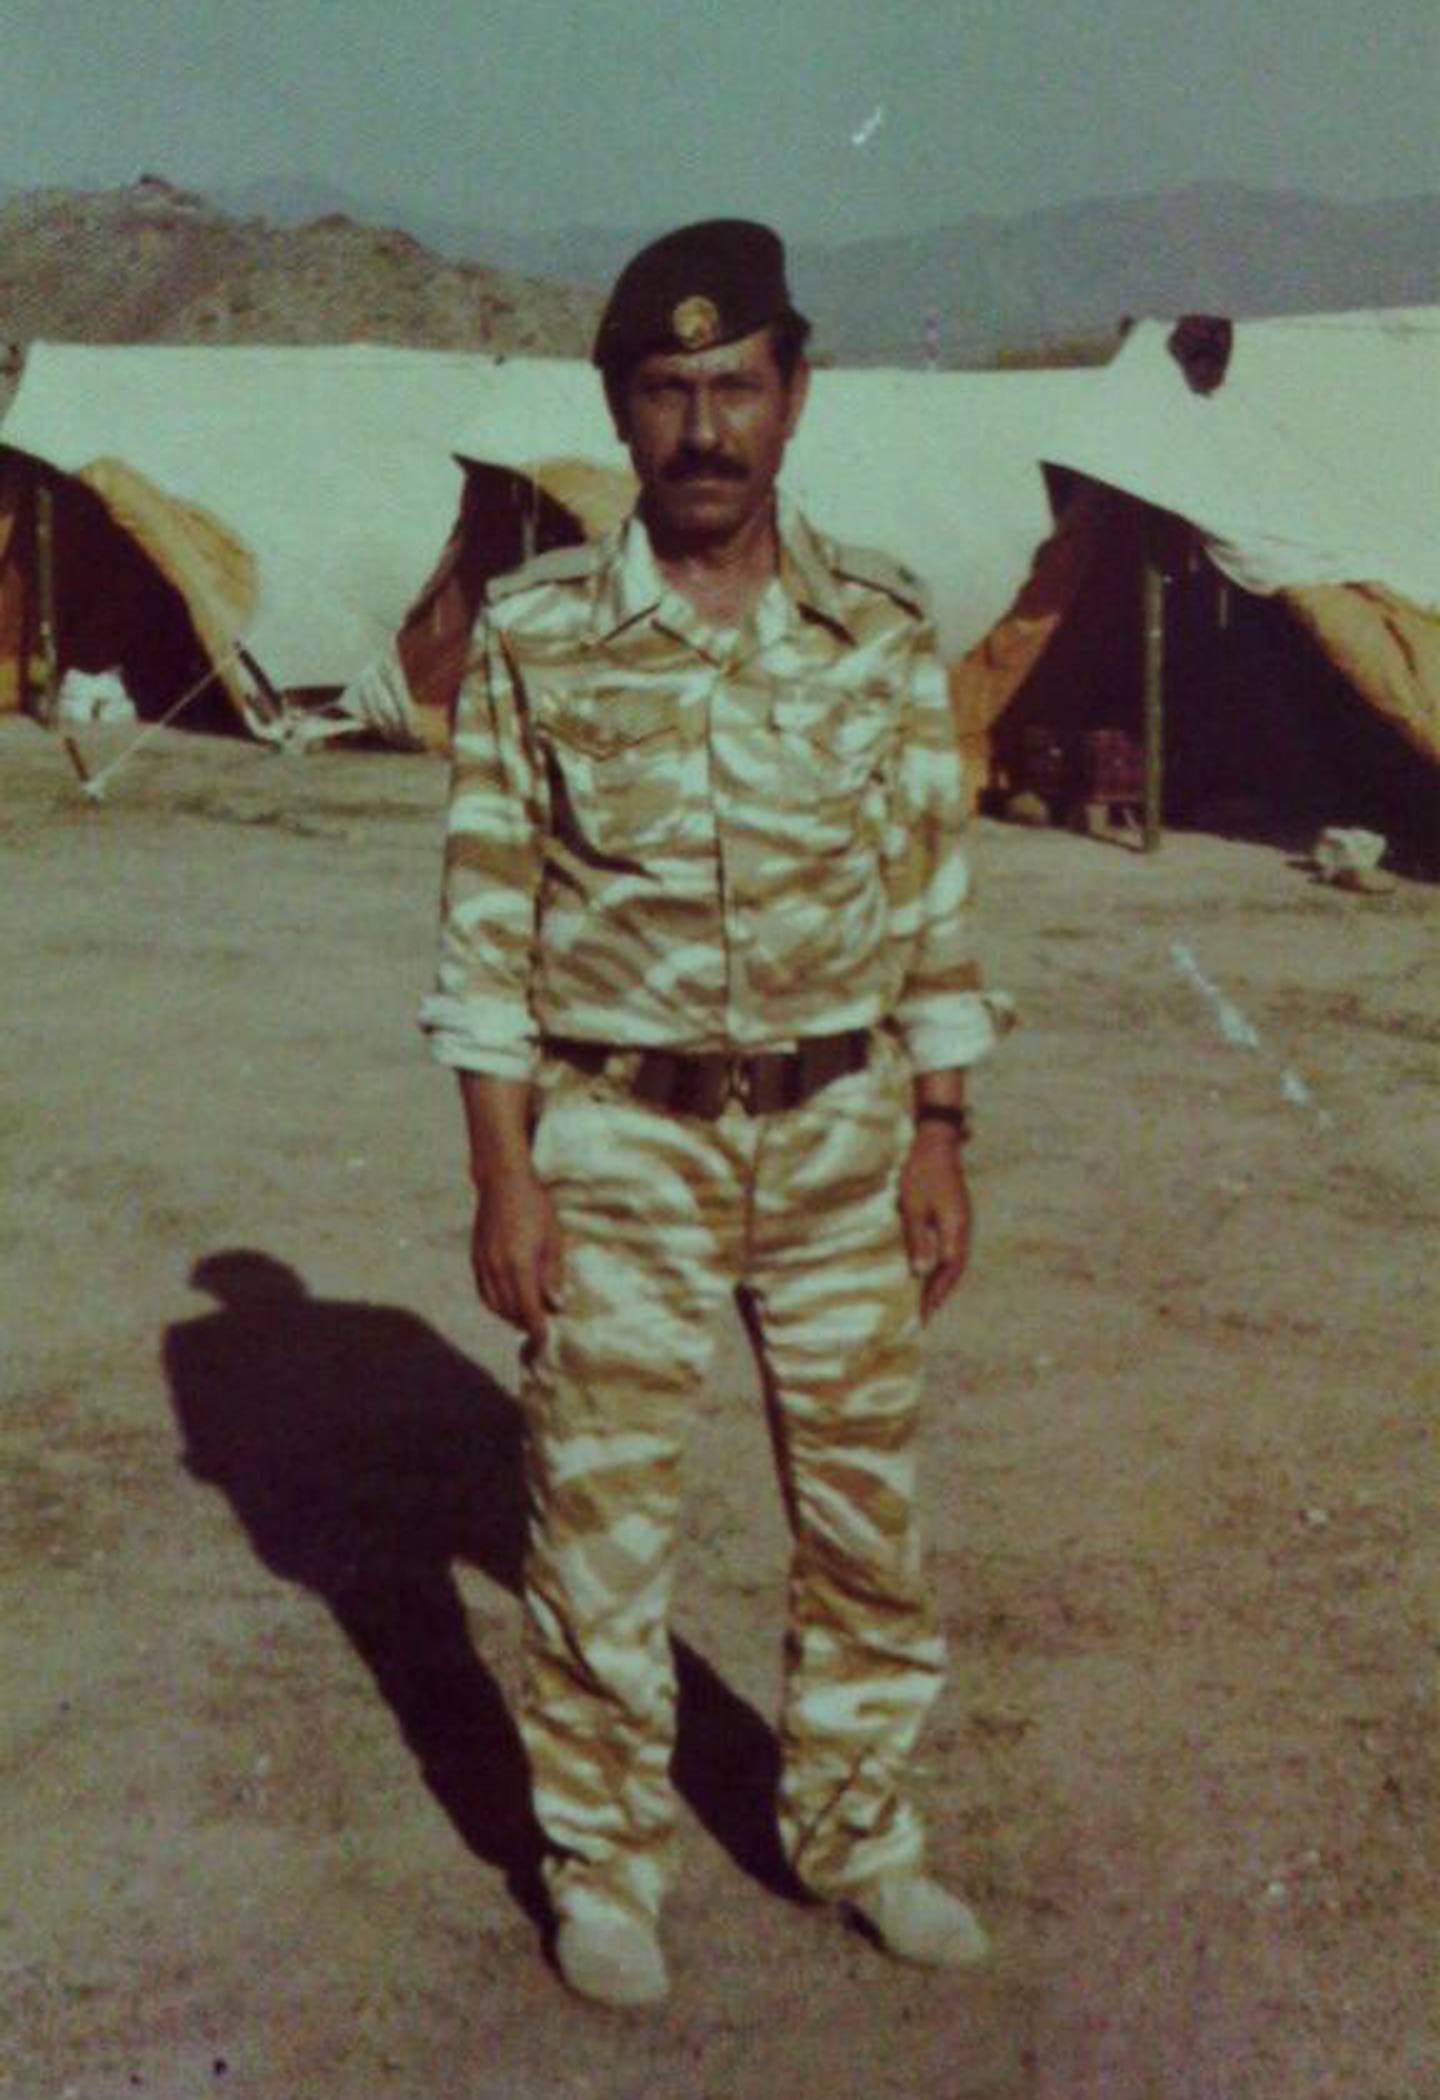 Majida’s father at Al Mirqab military camp in Sharjah in the late 60s or early 70s. Photo: Majida Obaid